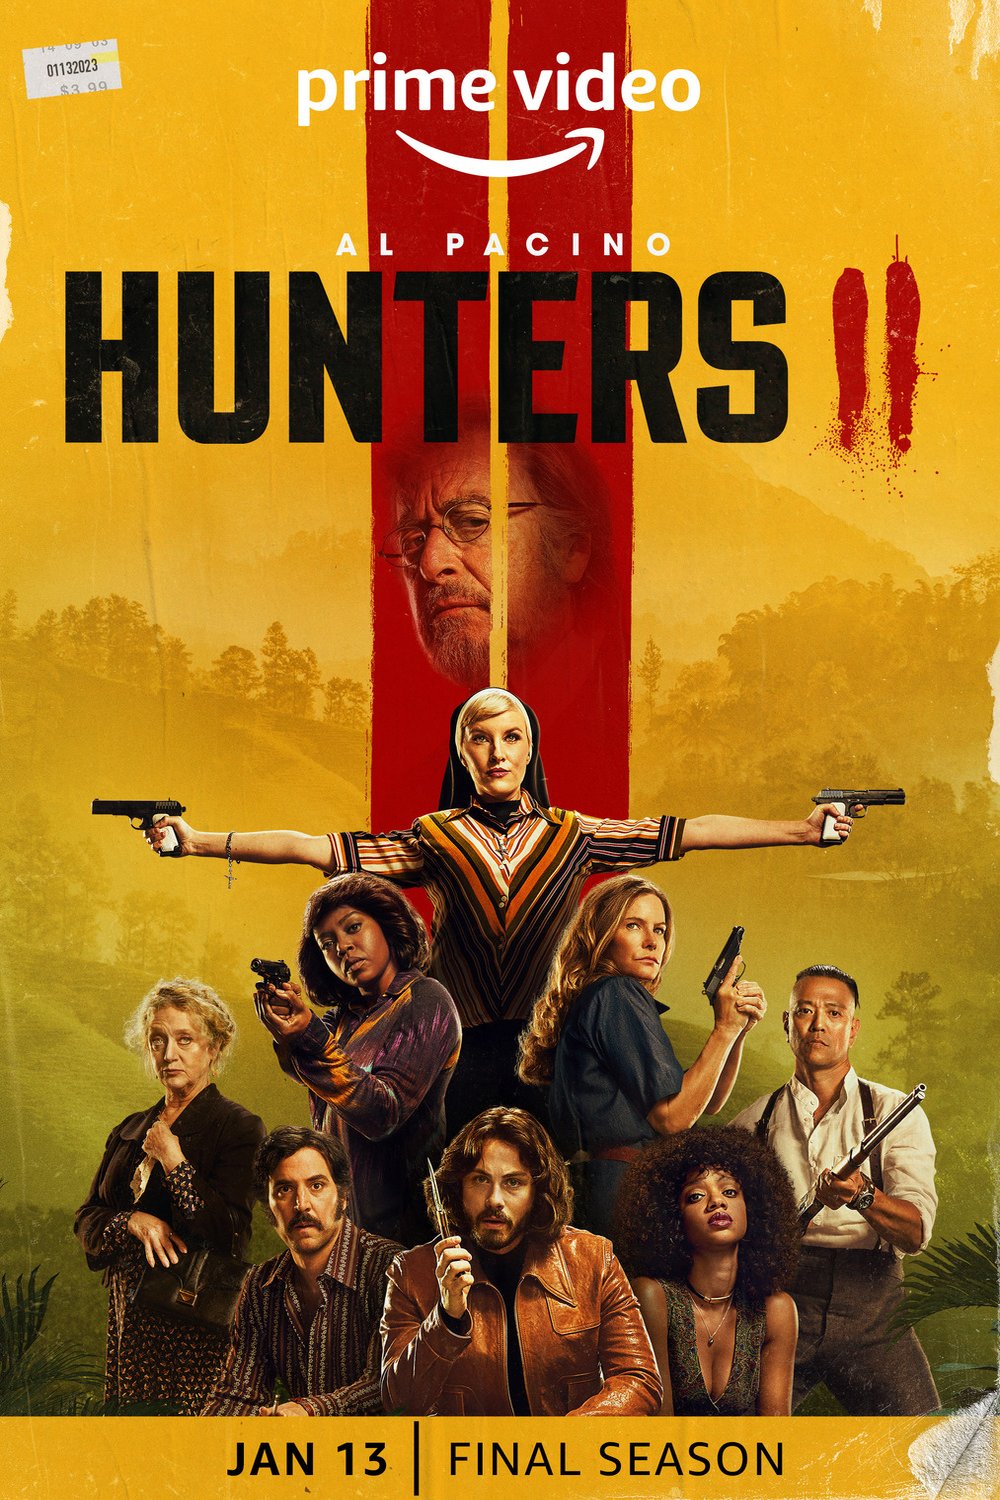 Poster of the movie Hunters